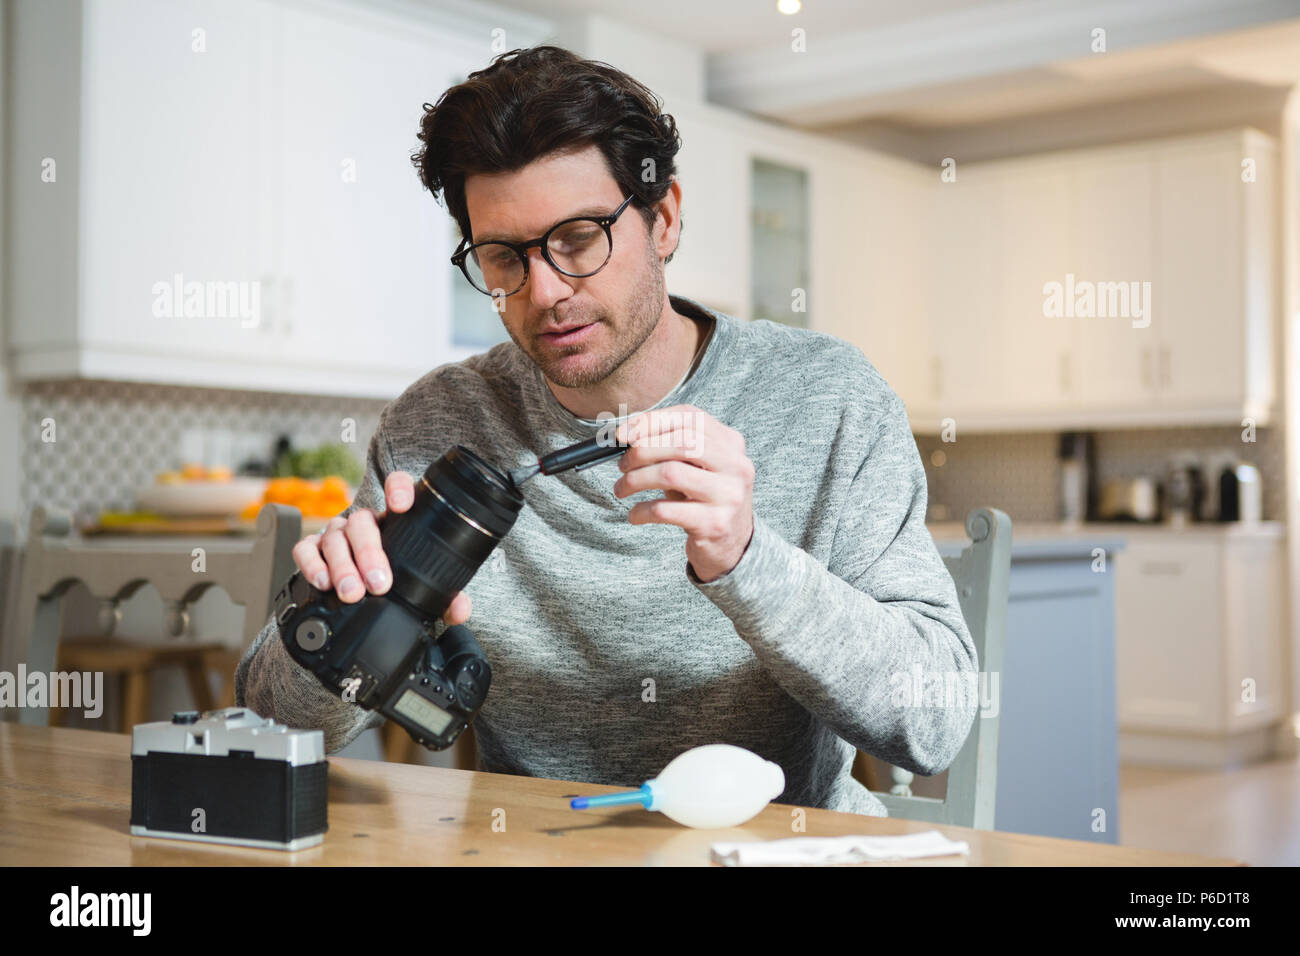 Man cleaning lens of digital camera at home Stock Photo